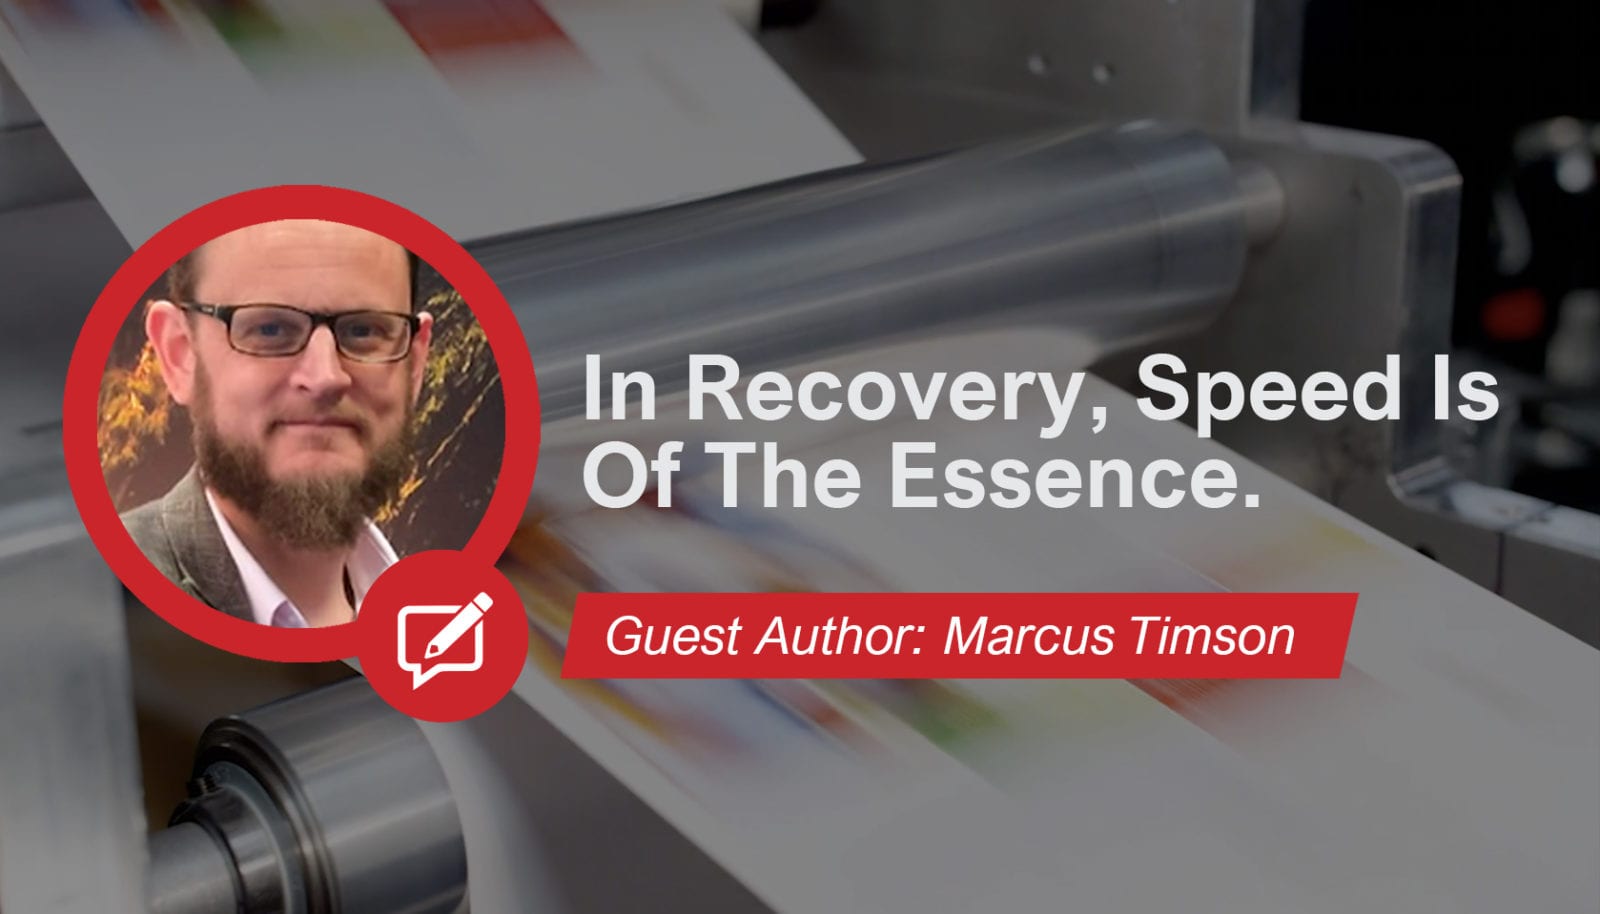 In Recovery, Speed is of the Essence